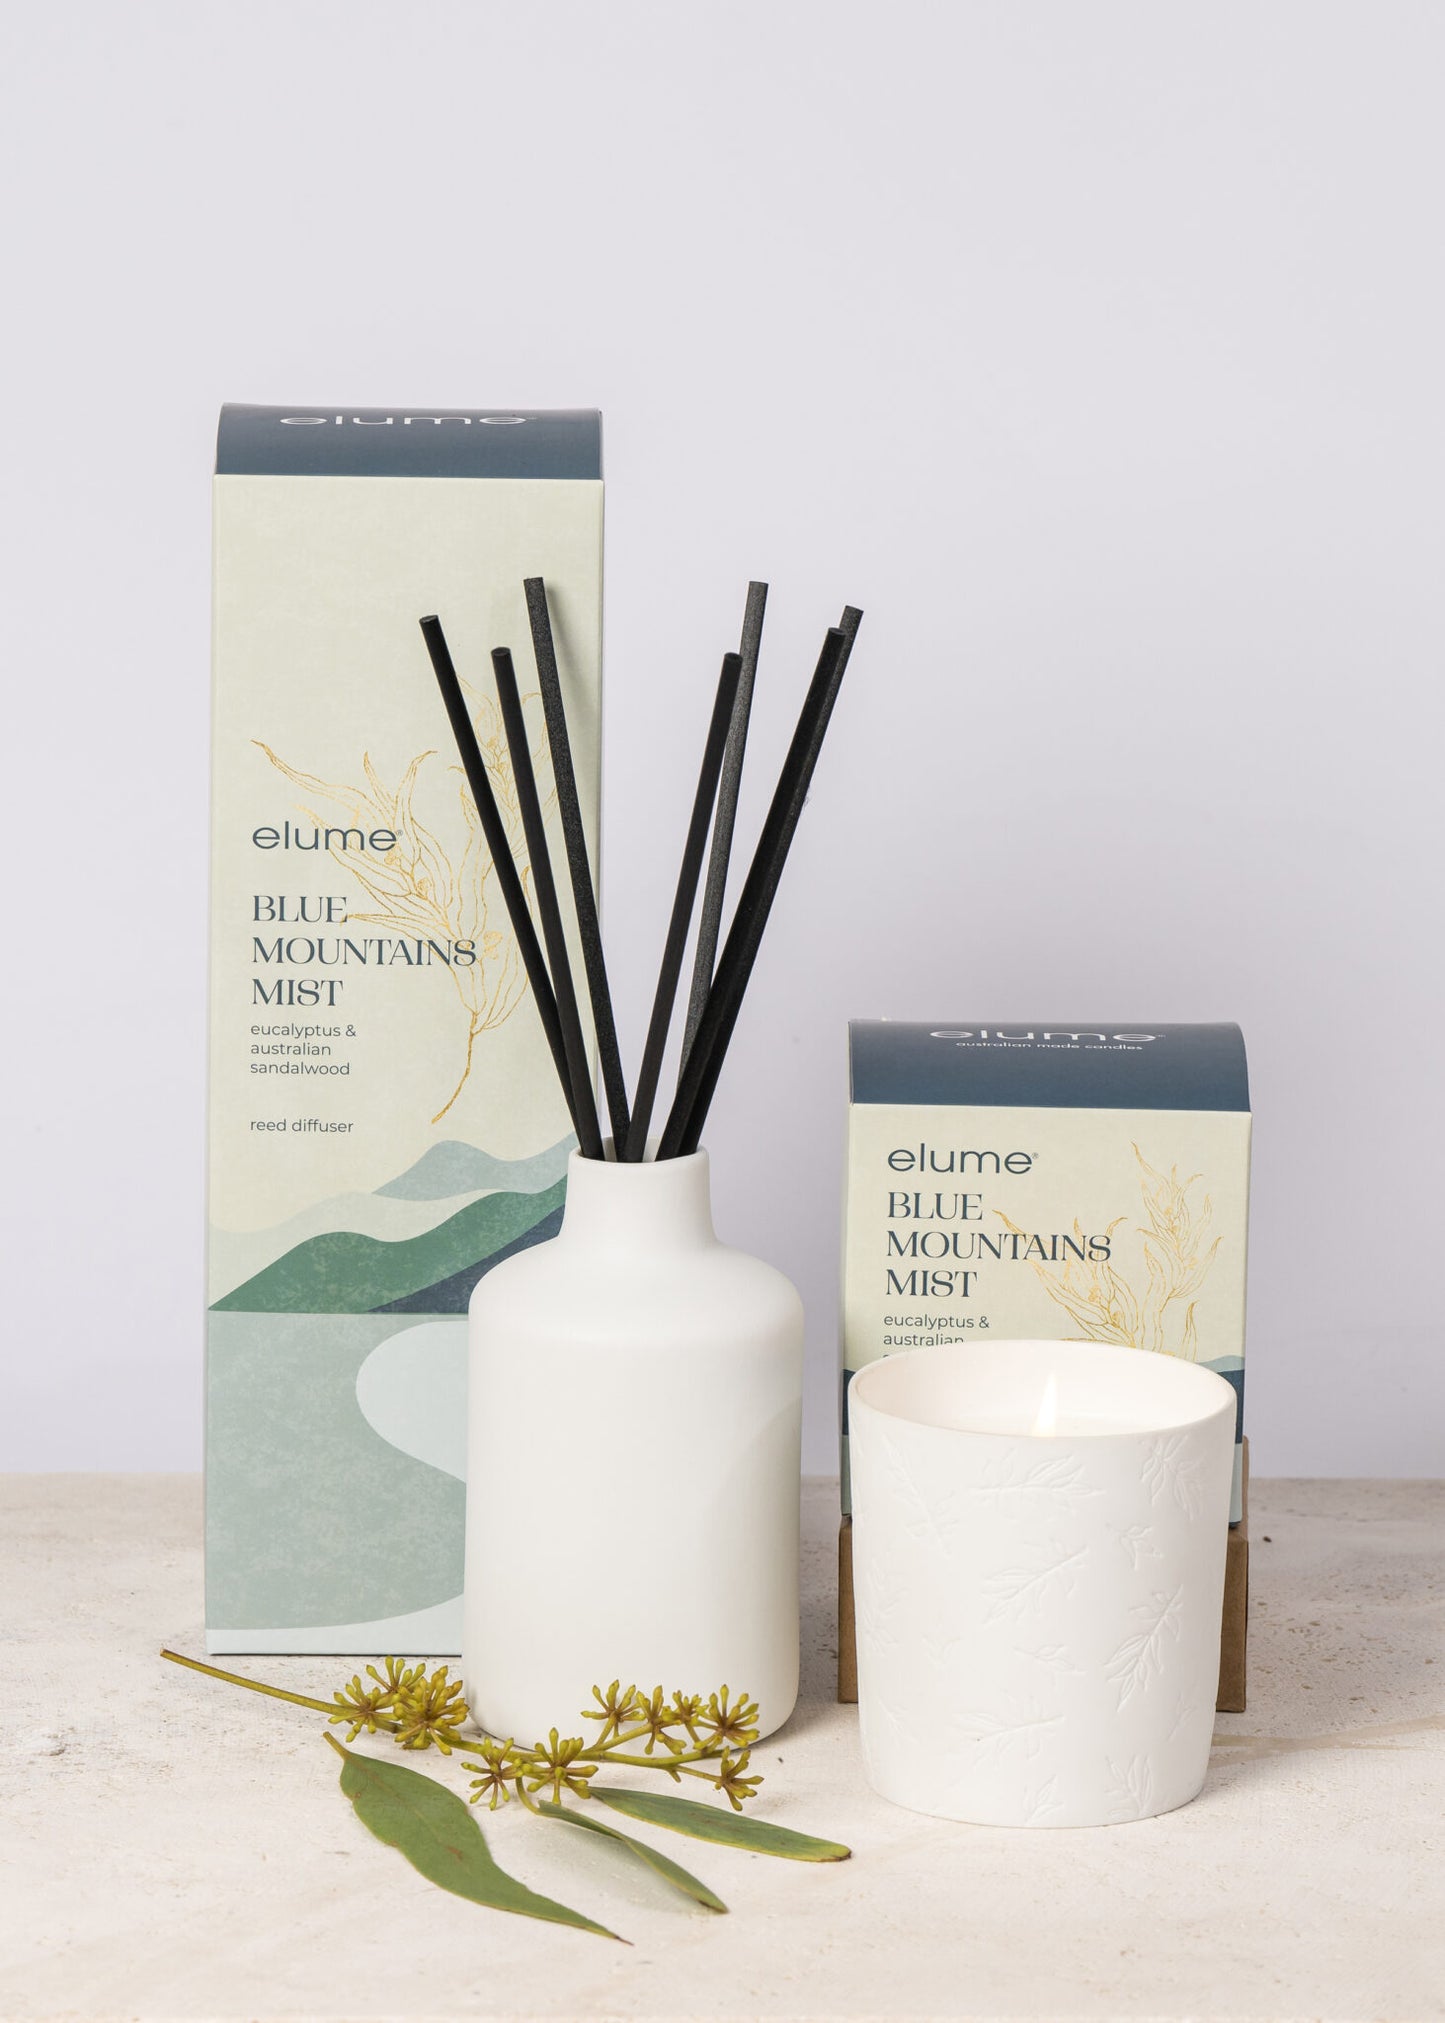 Elume Australian Escapes: Blue Mountains Mist Reed Diffusers